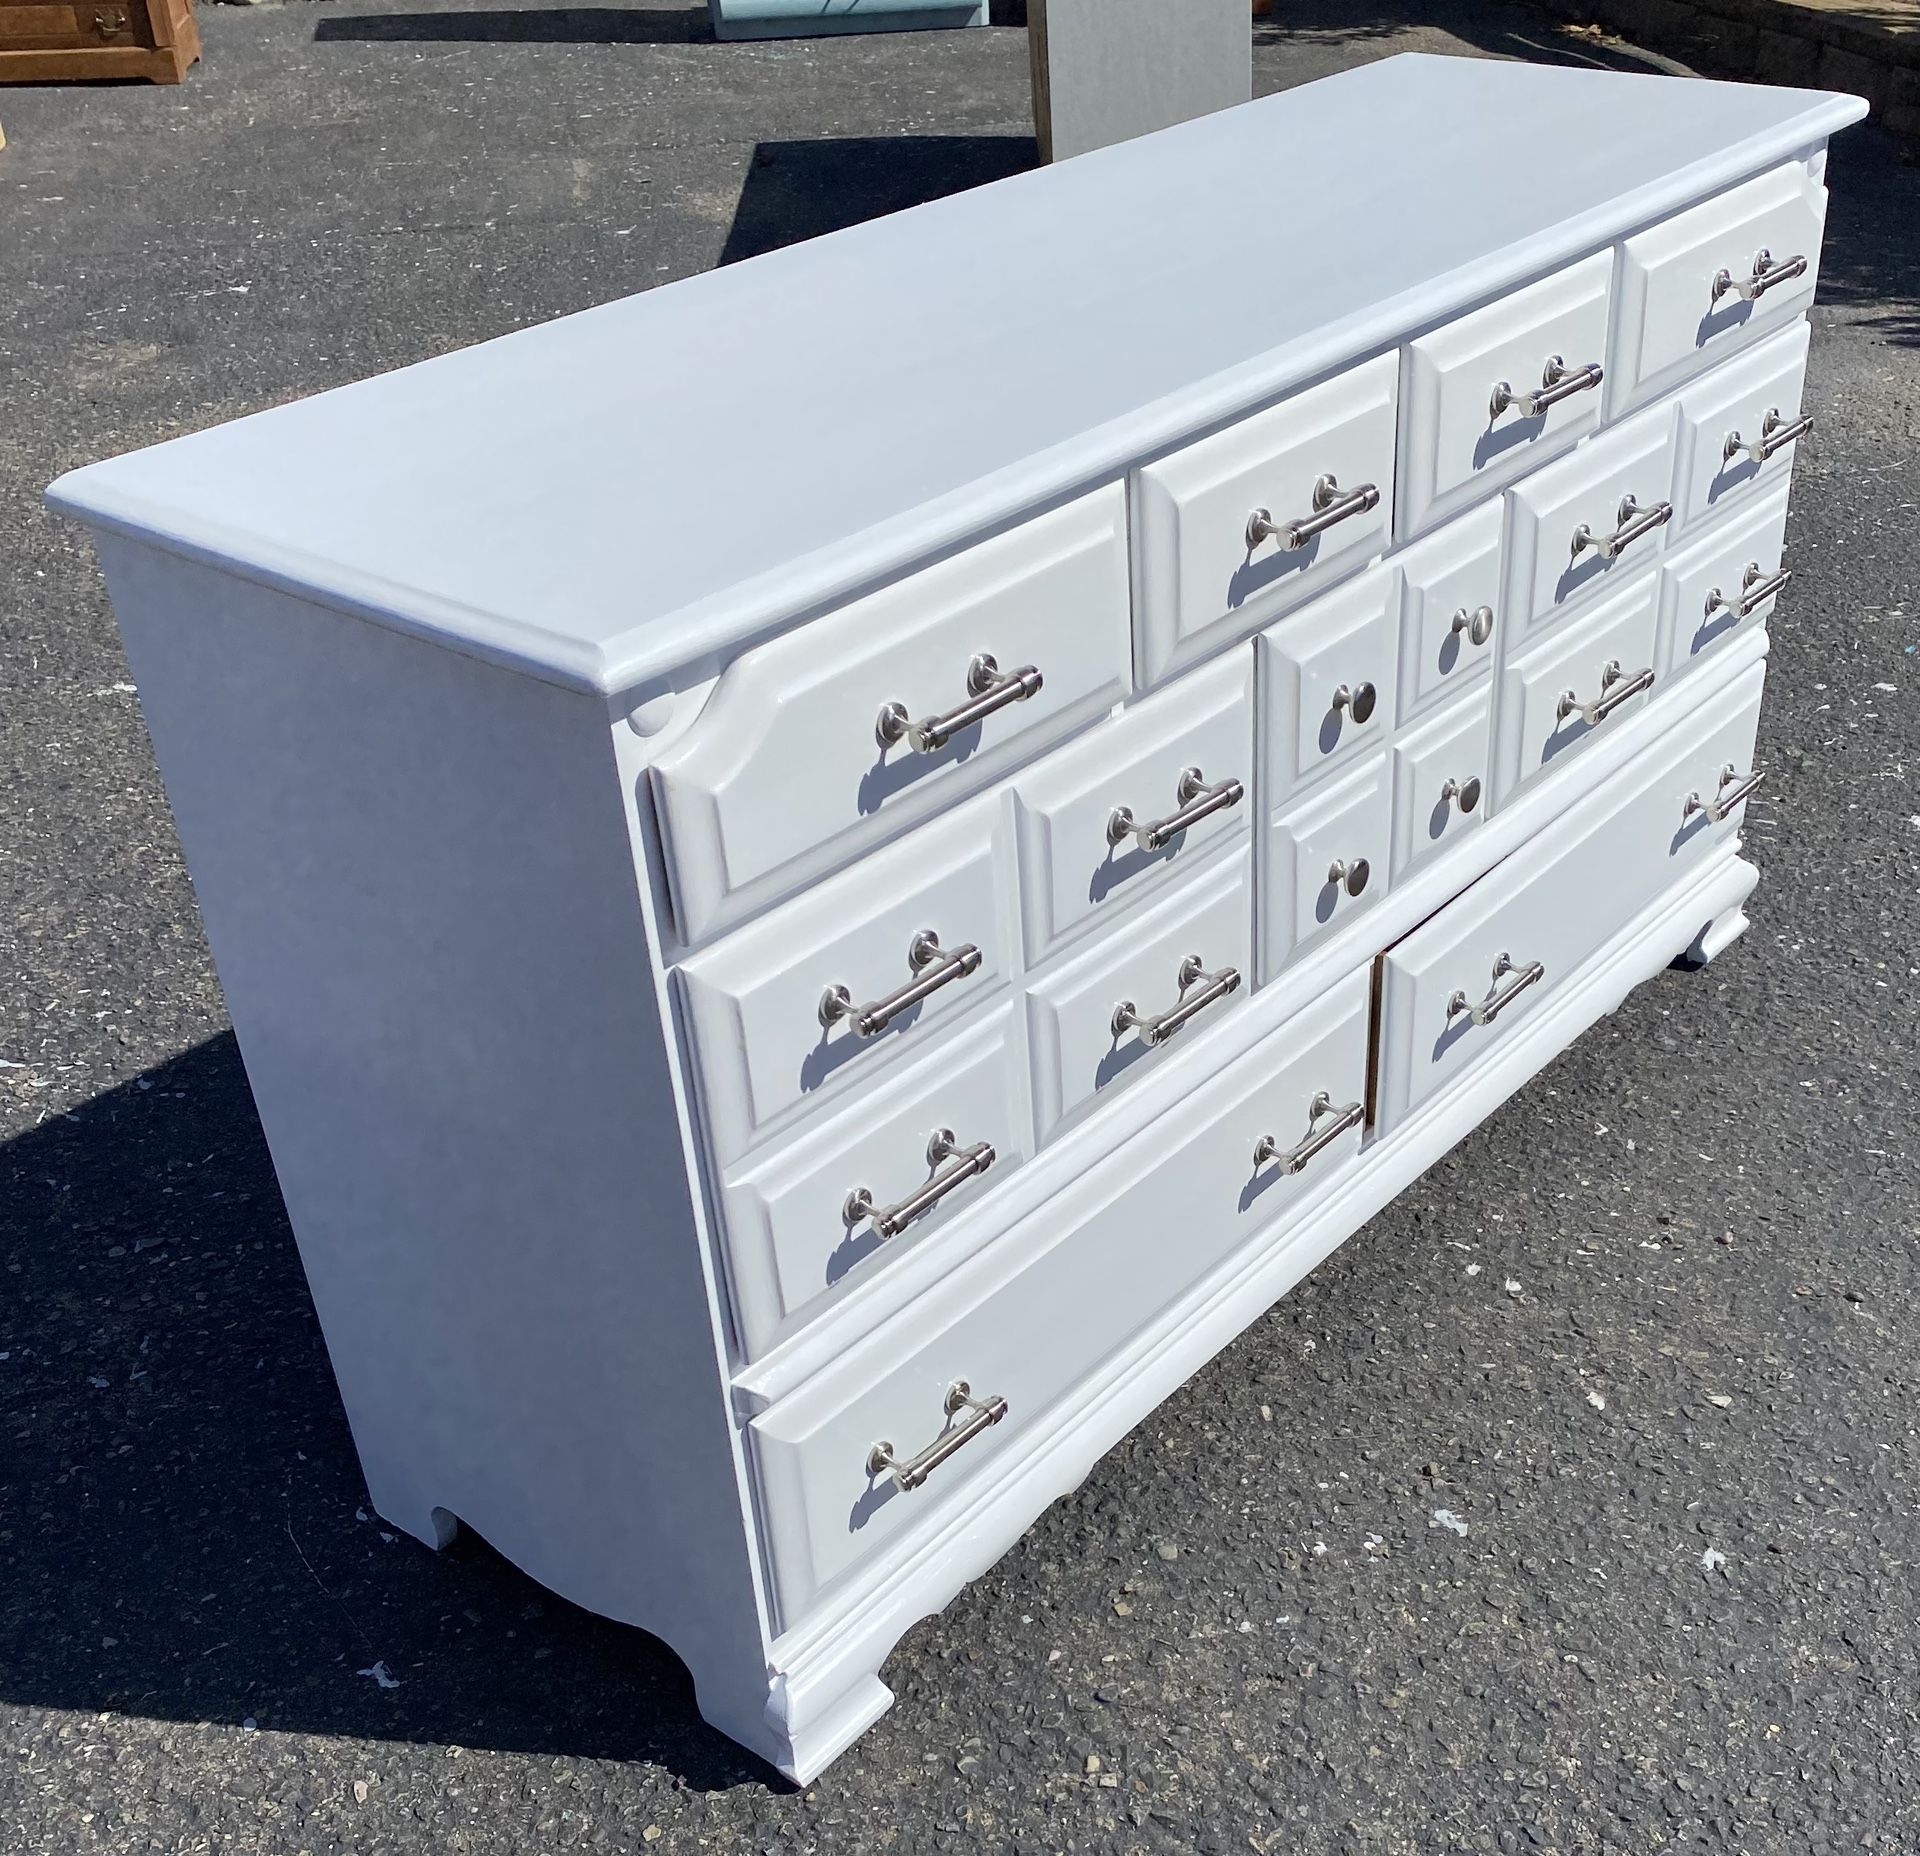 Dresser white 9 drawers All drawers slide great And is of dovetail construction #71750 Looks like it’s made out of birch The drawers have handles that